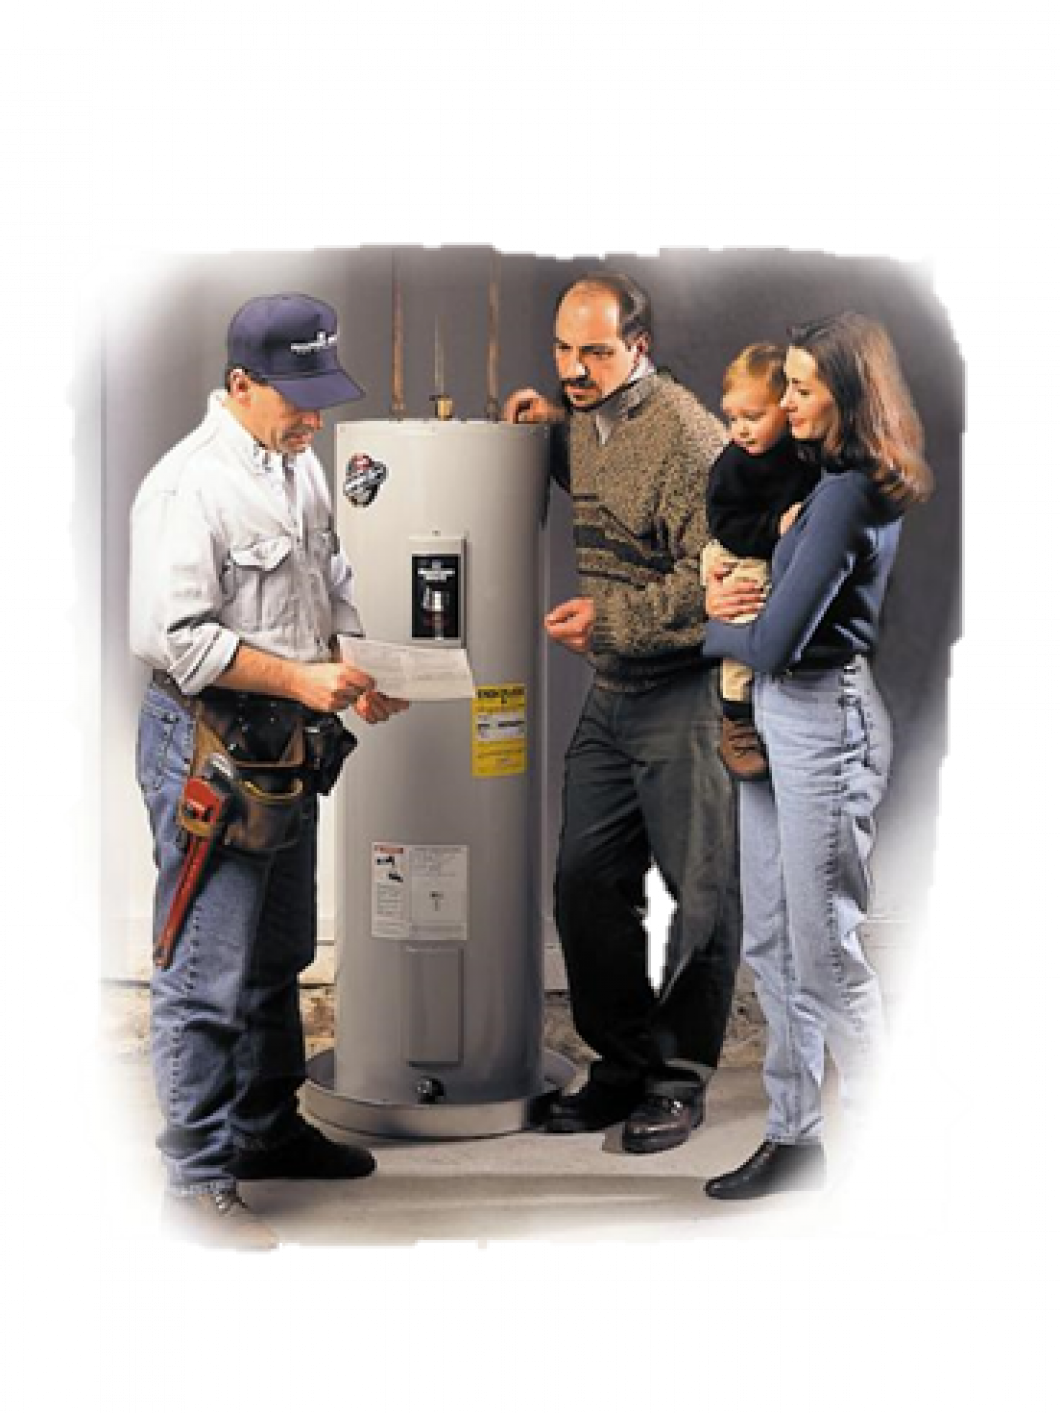 hot-water-heater-rebate-leatherstocking-gas-company